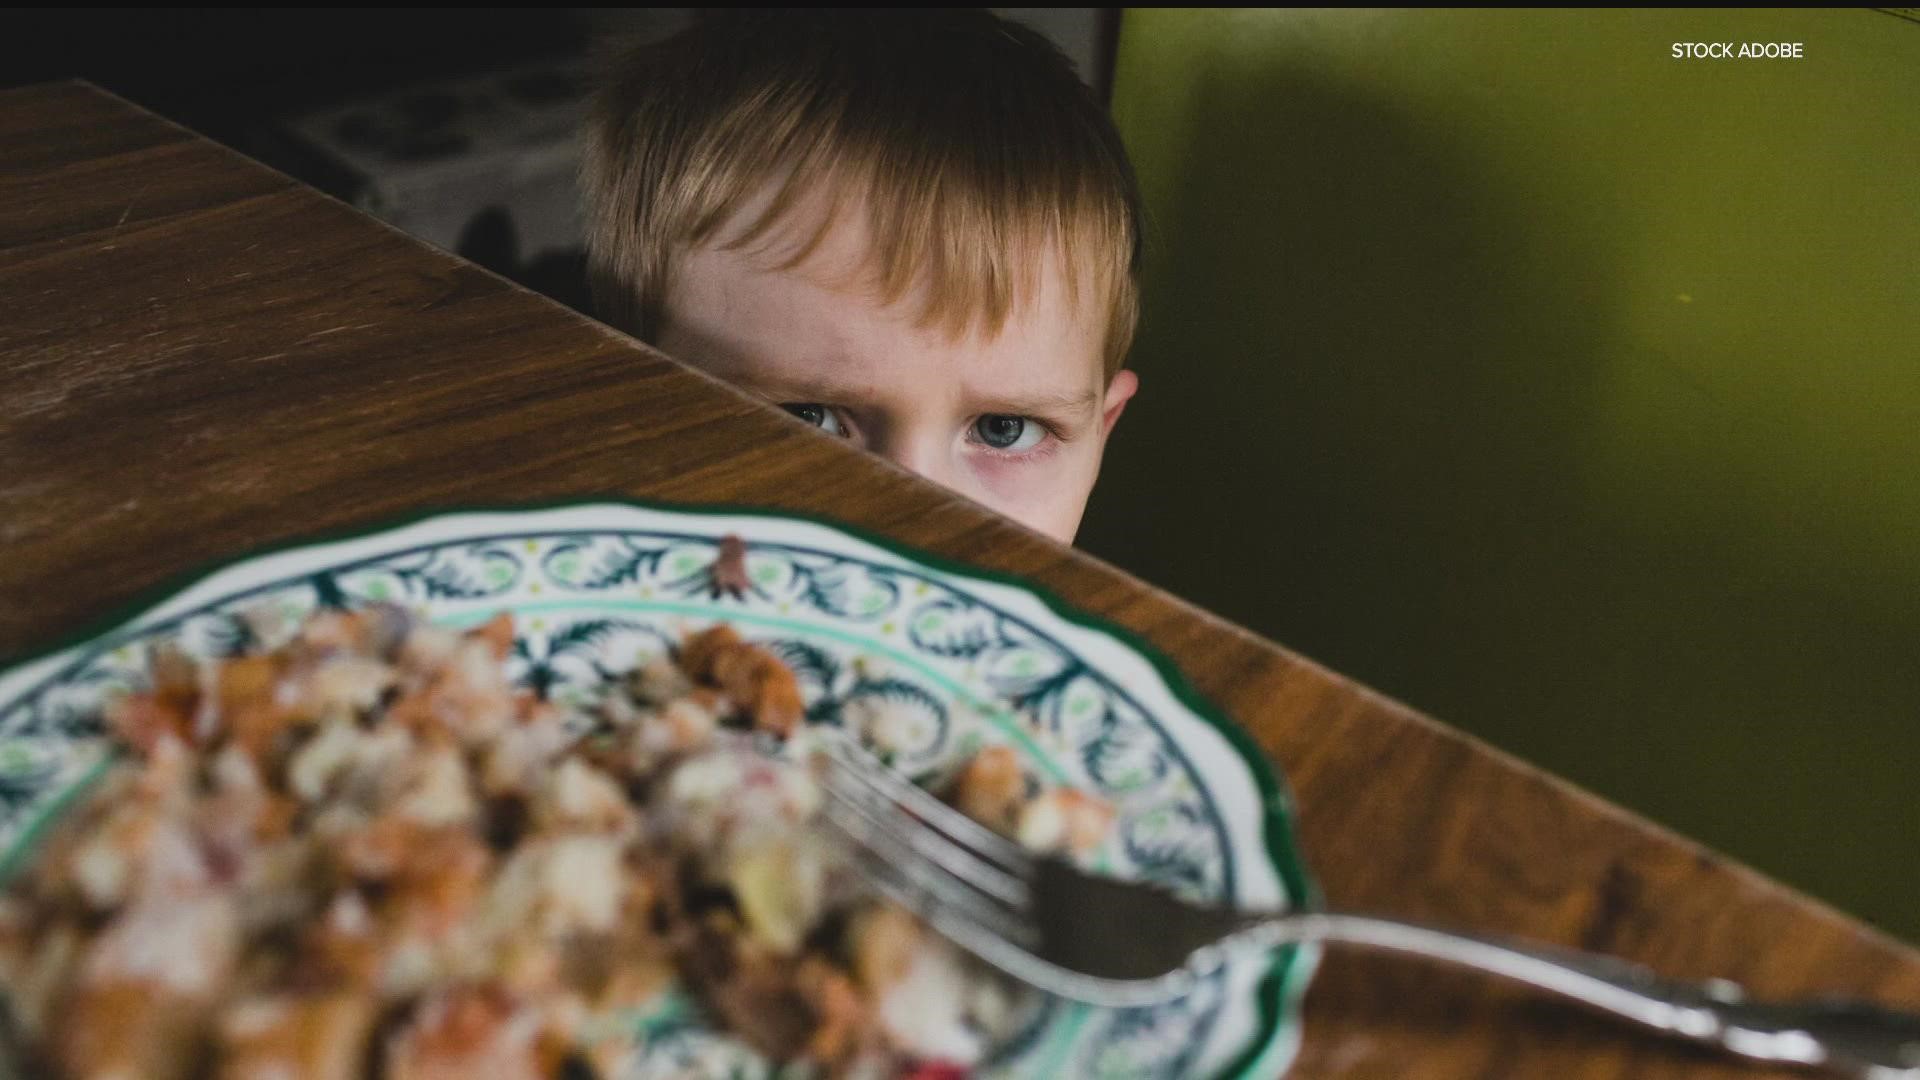 Some kids are picky eaters, but it doesn't need to turn into a dinnertime battle every evening.